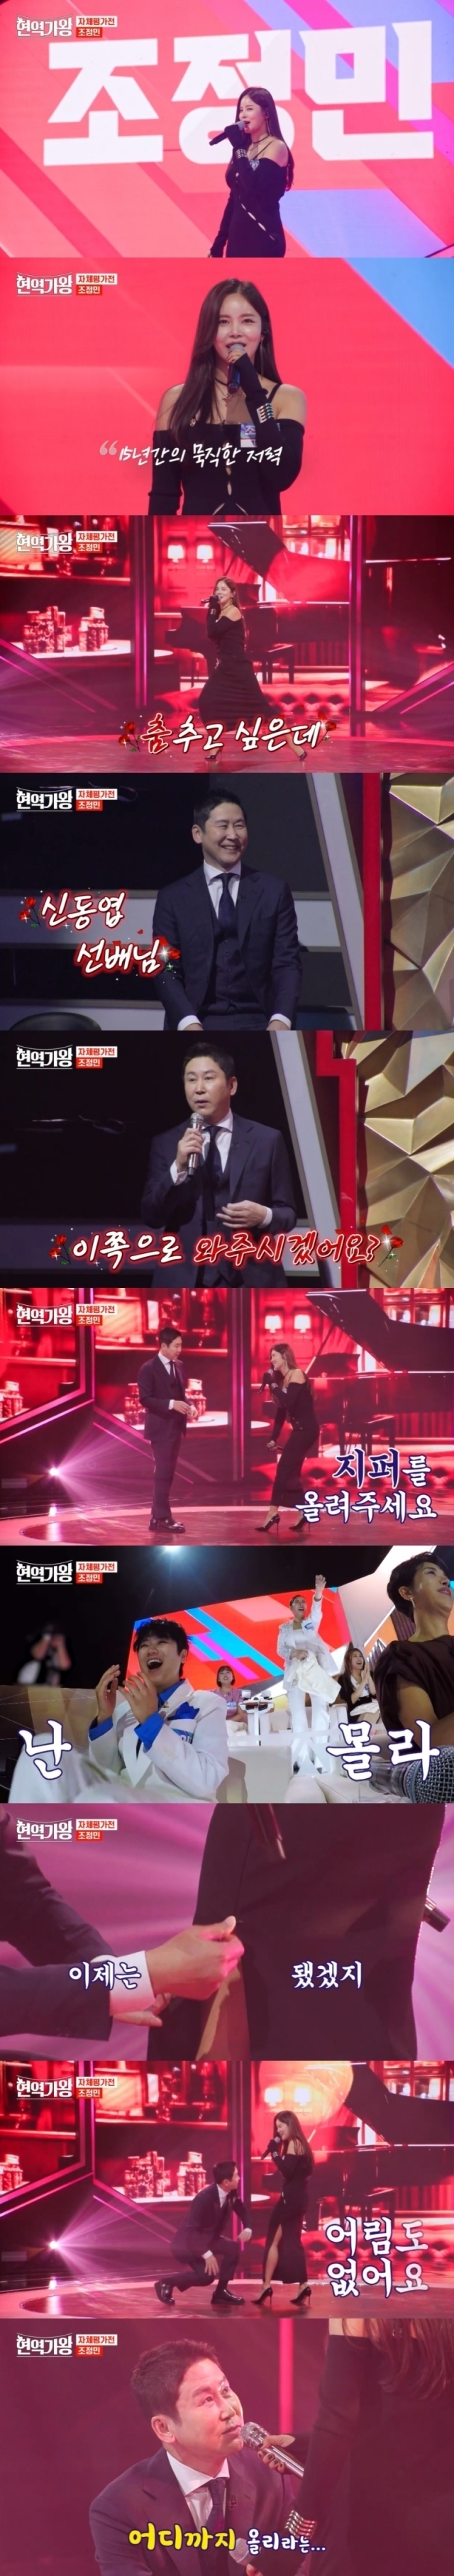 Active duty 15th year Trot Singer Jo Jung-min MC Shin Dong-yup and boasted a stunning chemistry.MBN active king, which was first broadcast on the 28th, was a self-evaluation exhibition.On the day of the broadcast, Jo Jung-min said, Mr. I think its a singer who came up with Trot fever, but in fact its an old singer. After introducing Jasin, he said, Ill show you my 15 years of experience.Jo Jung-min, who selected Jasins hit song Ready Q on stage, summoned MC Shin Dong-yup, saying, The skirt is too long, and asked him to lift the Zip next to the skirt when he could not dance because of the tight costume.Jo Jung-min said that Shin Dong-yup stood up and put Zip in half.Jo Jung-min made a deep slit in her skirt with the help of Shin Dong-yup, revealing her legs and causing cheers with sexy gestures.Shin Dong-yup said to Jo Jung-min, Thank you for being able to dance now.After completing the stage, Jo Jung-min confessed a secret that he had not been able to tell.In fact, I almost couldnt sing. I had thyroid cancer surgery last June, Jo Jung-min said. I didnt even talk to my mom and set a date for the surgery.I thought I would not be able to call Ready Cue again, but I was so thankful that you enjoyed it and were with me. Jo Jung-min said, Its been about three months, and thanks to you, my voice is coming out. I hope that my own lyrics will be comforting not only me but also all of you.